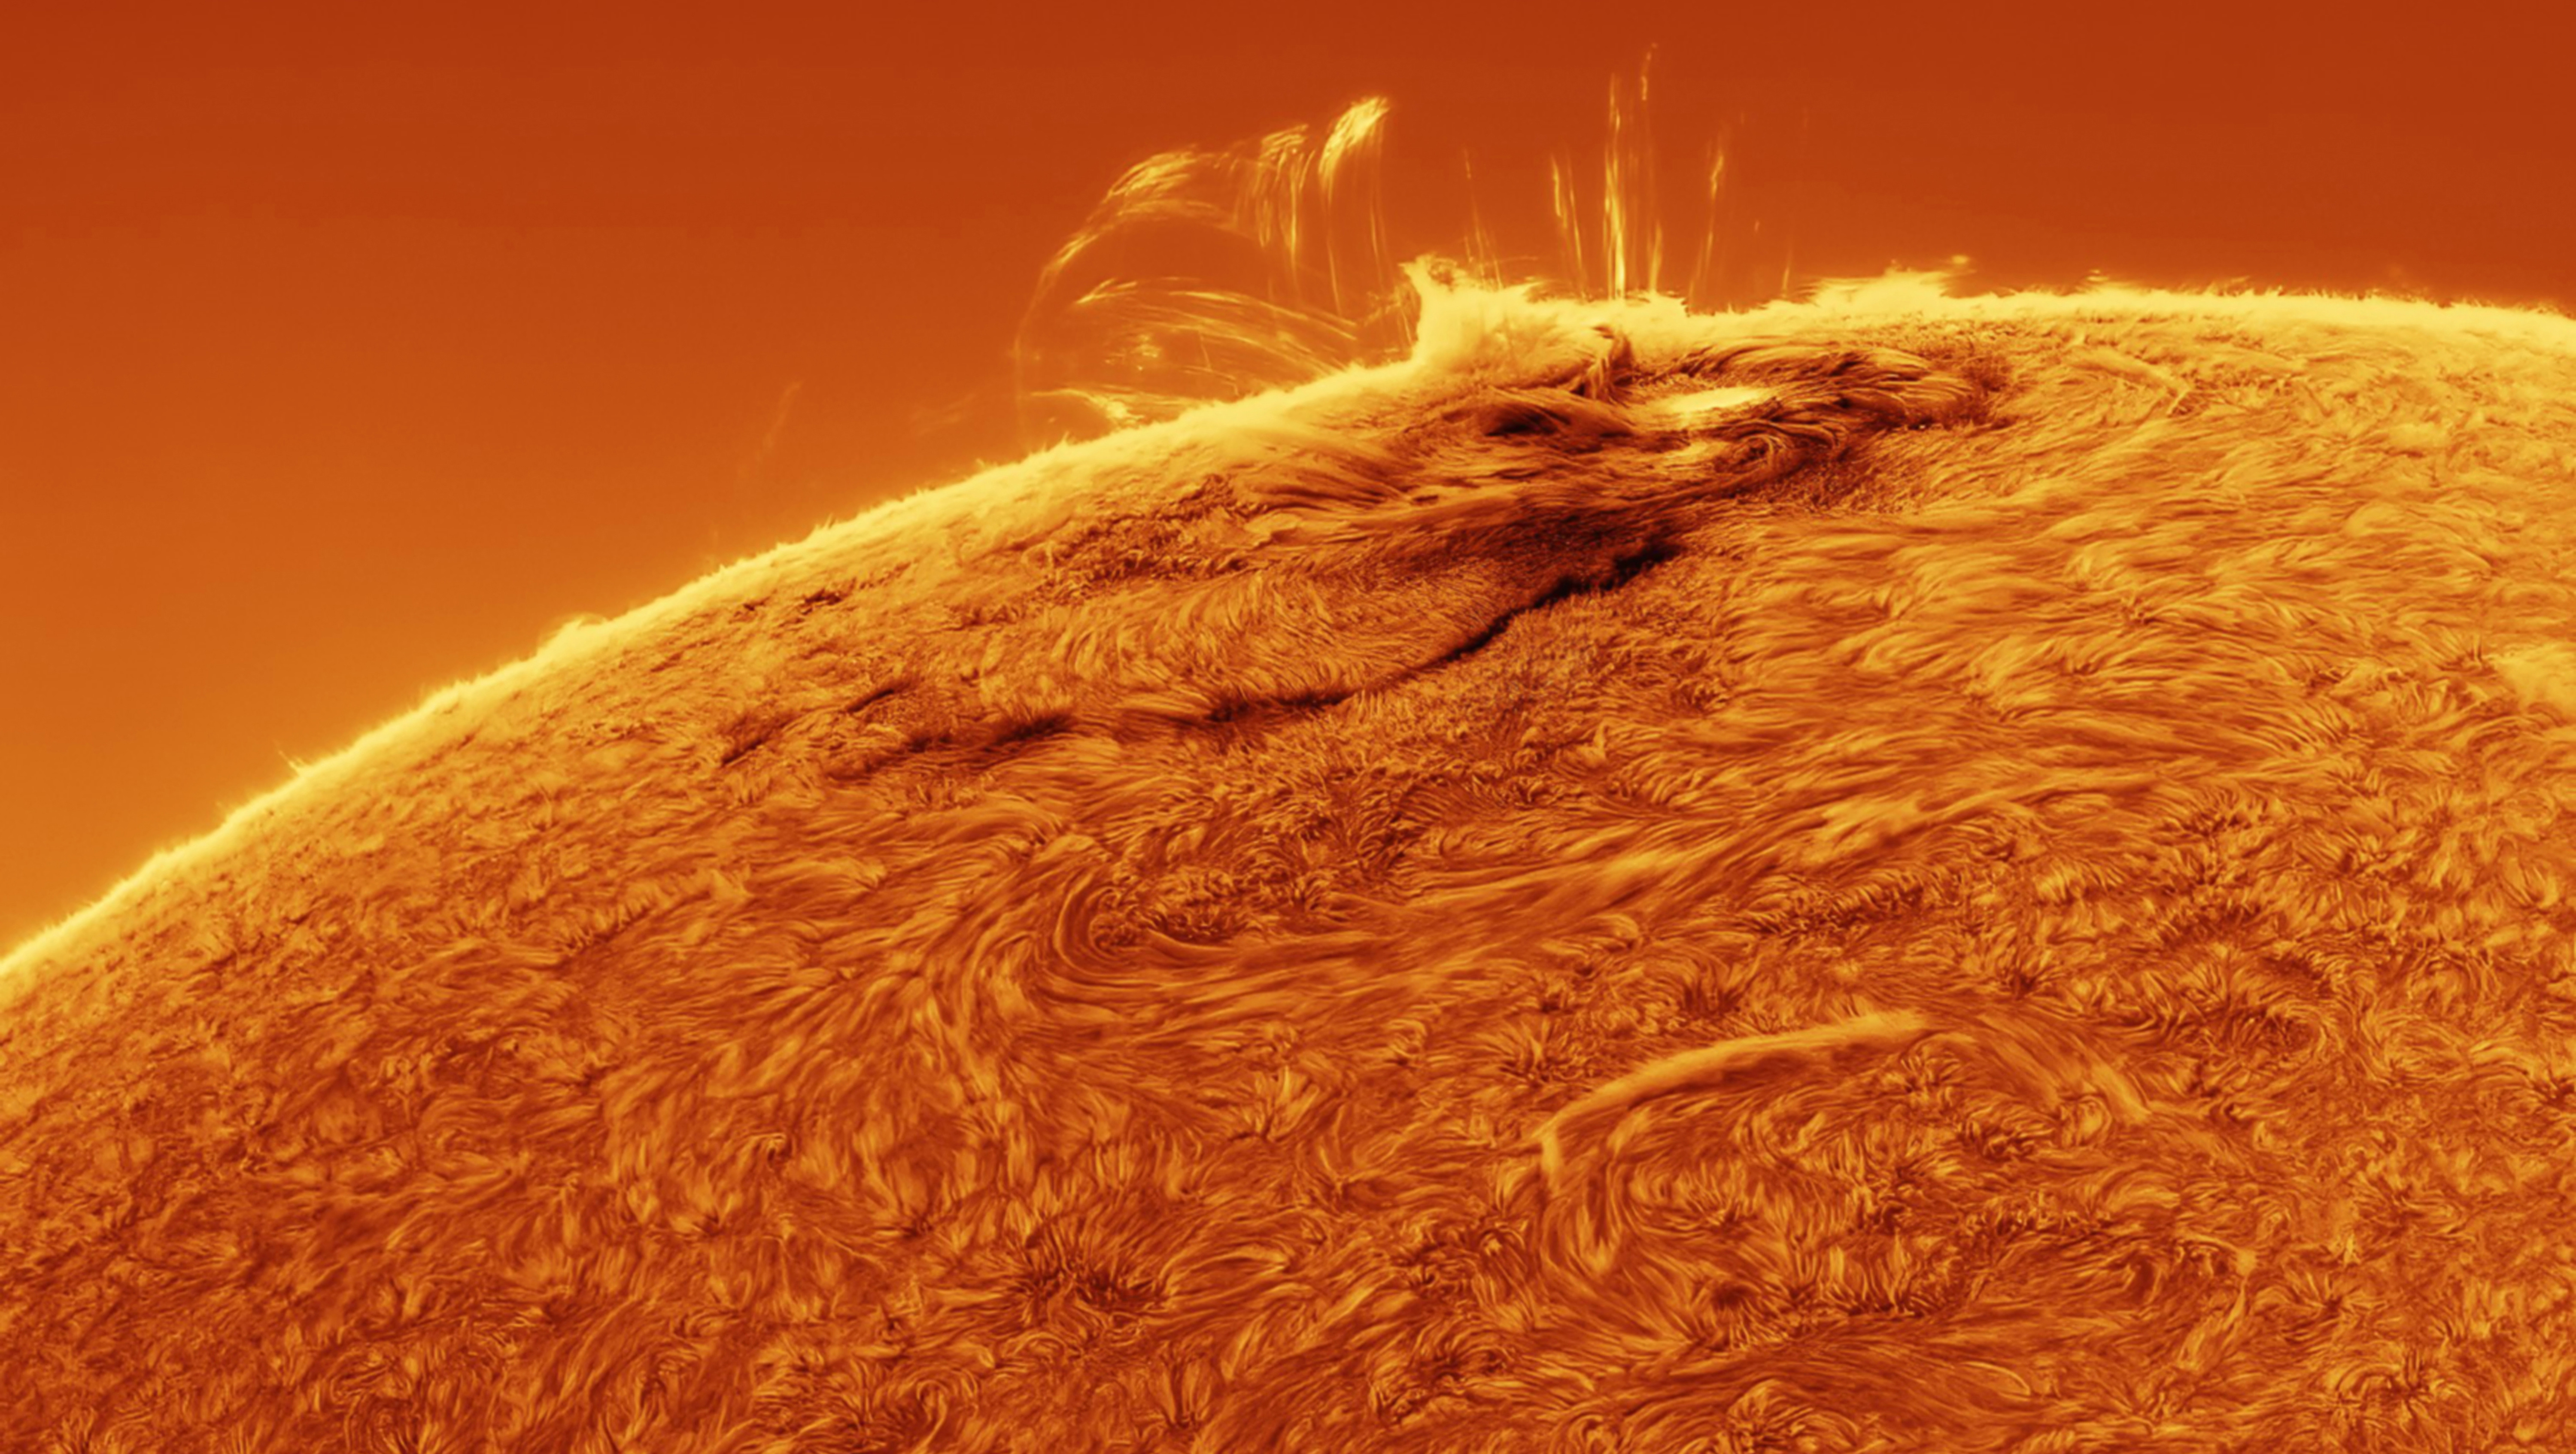 The limb of the sun is visible with eruption coming from it. 